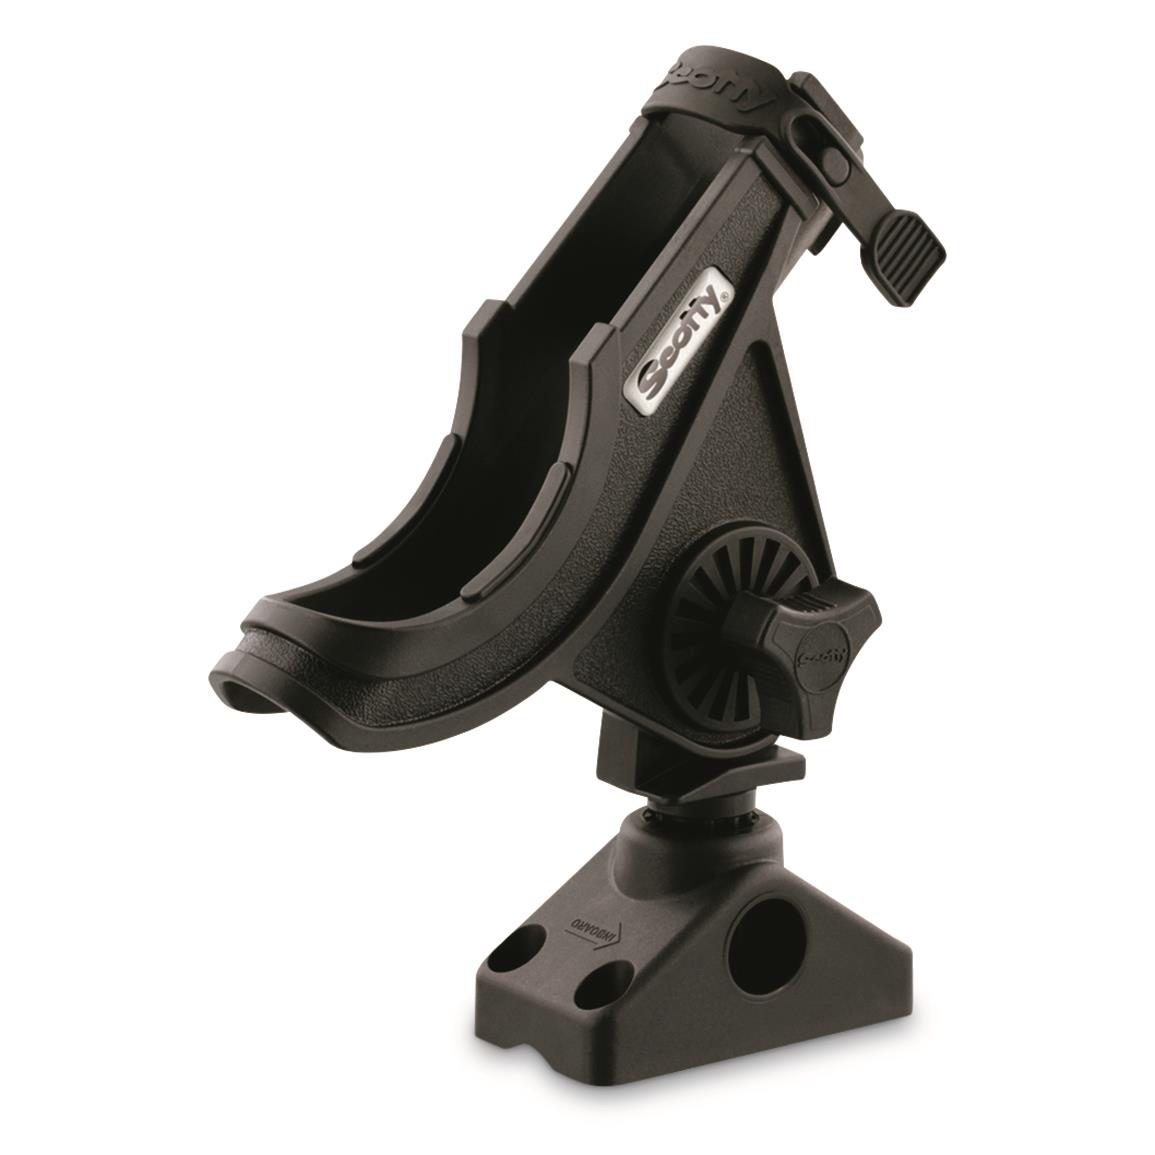 Scotty Baitcasting / Spinning Rod Holder with 0241 Side/Deck Mount